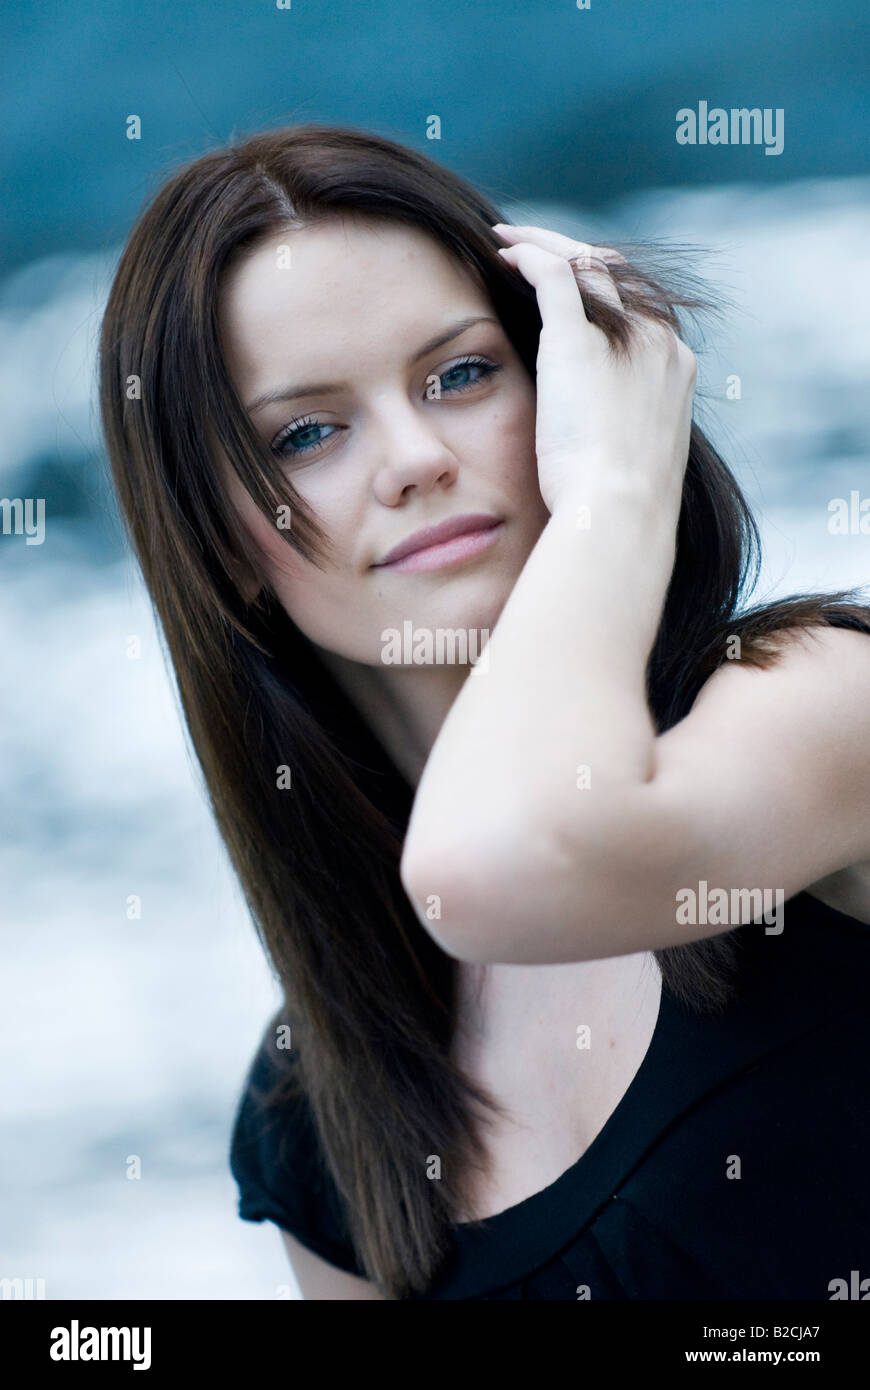 young woman grasping in her hair Stock Photo